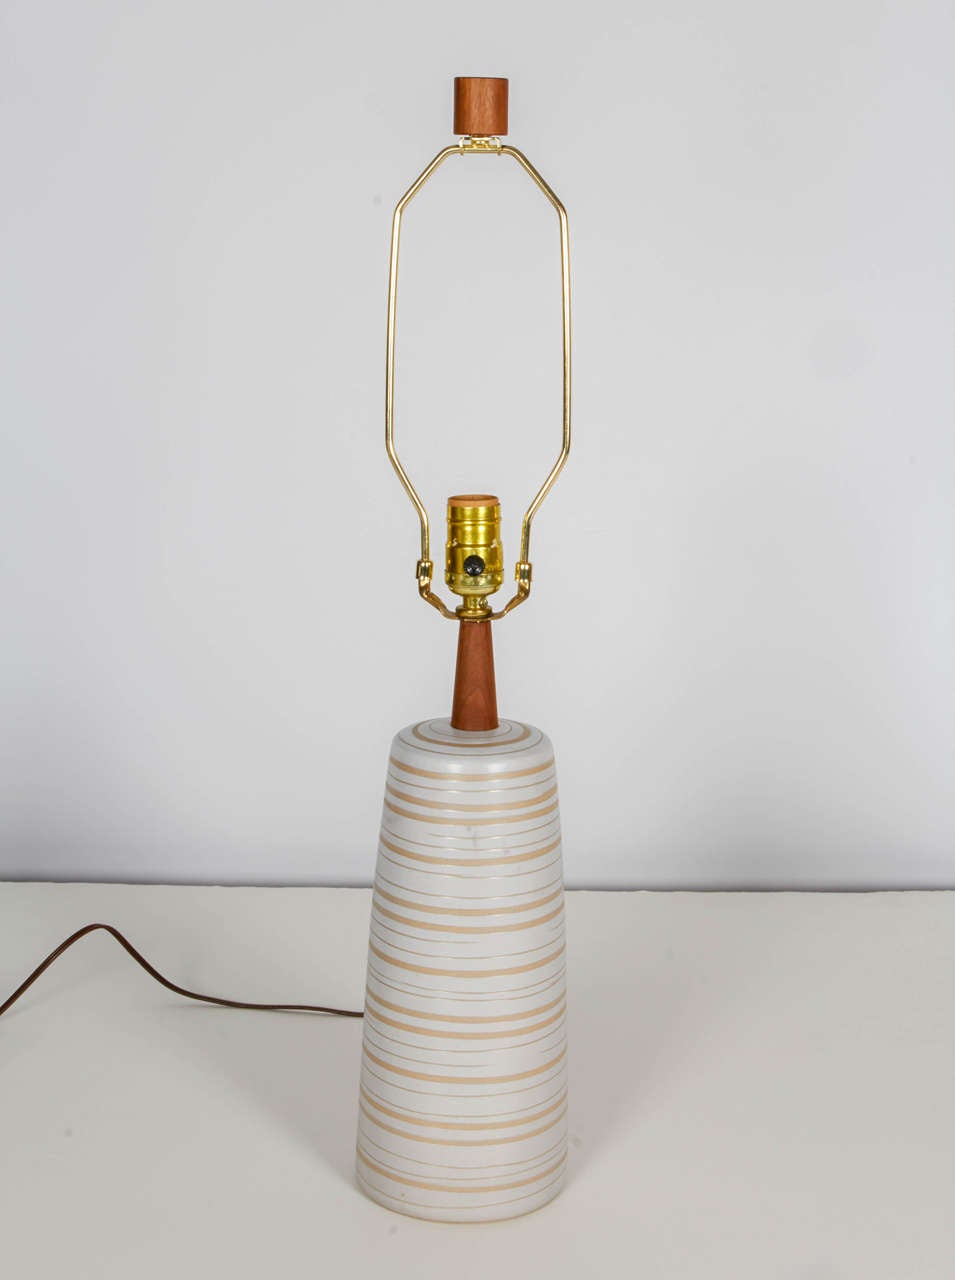 20th Century Pair of Incised Lamps by Jane and Gordon Martz for Marshall Studios